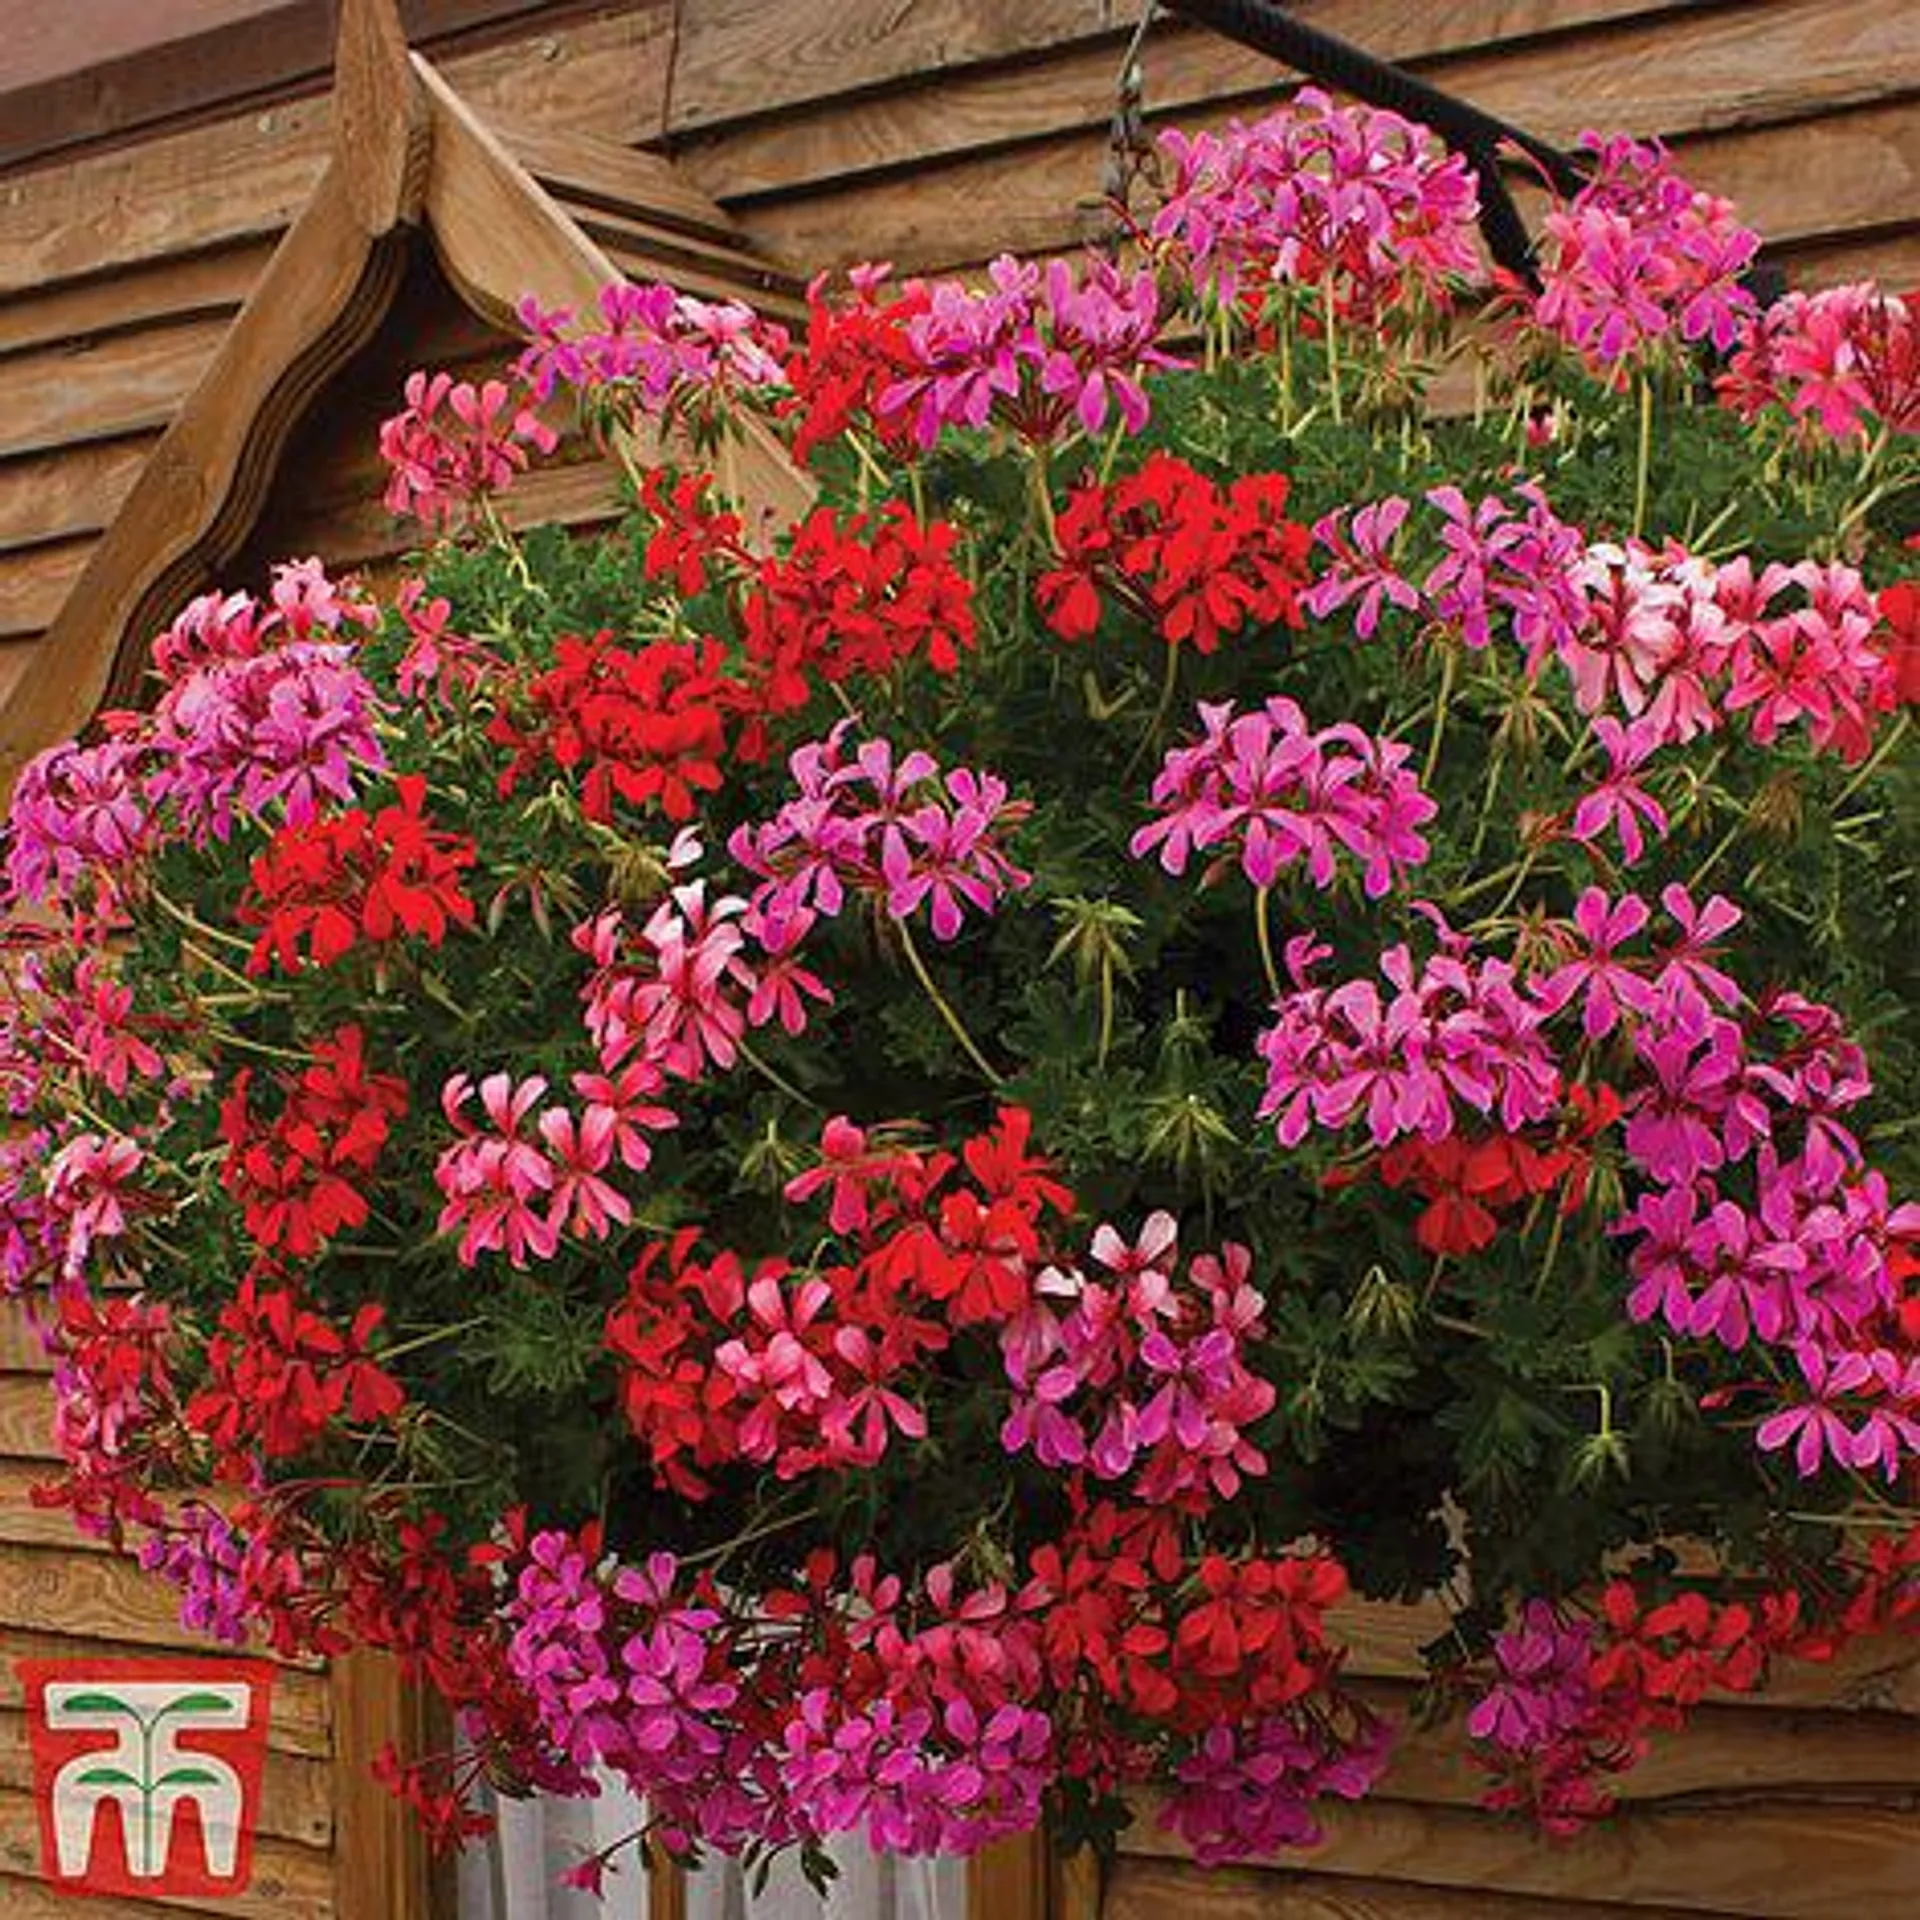 Buy two 25cm Pre-Planted Baskets ONLY £29.99